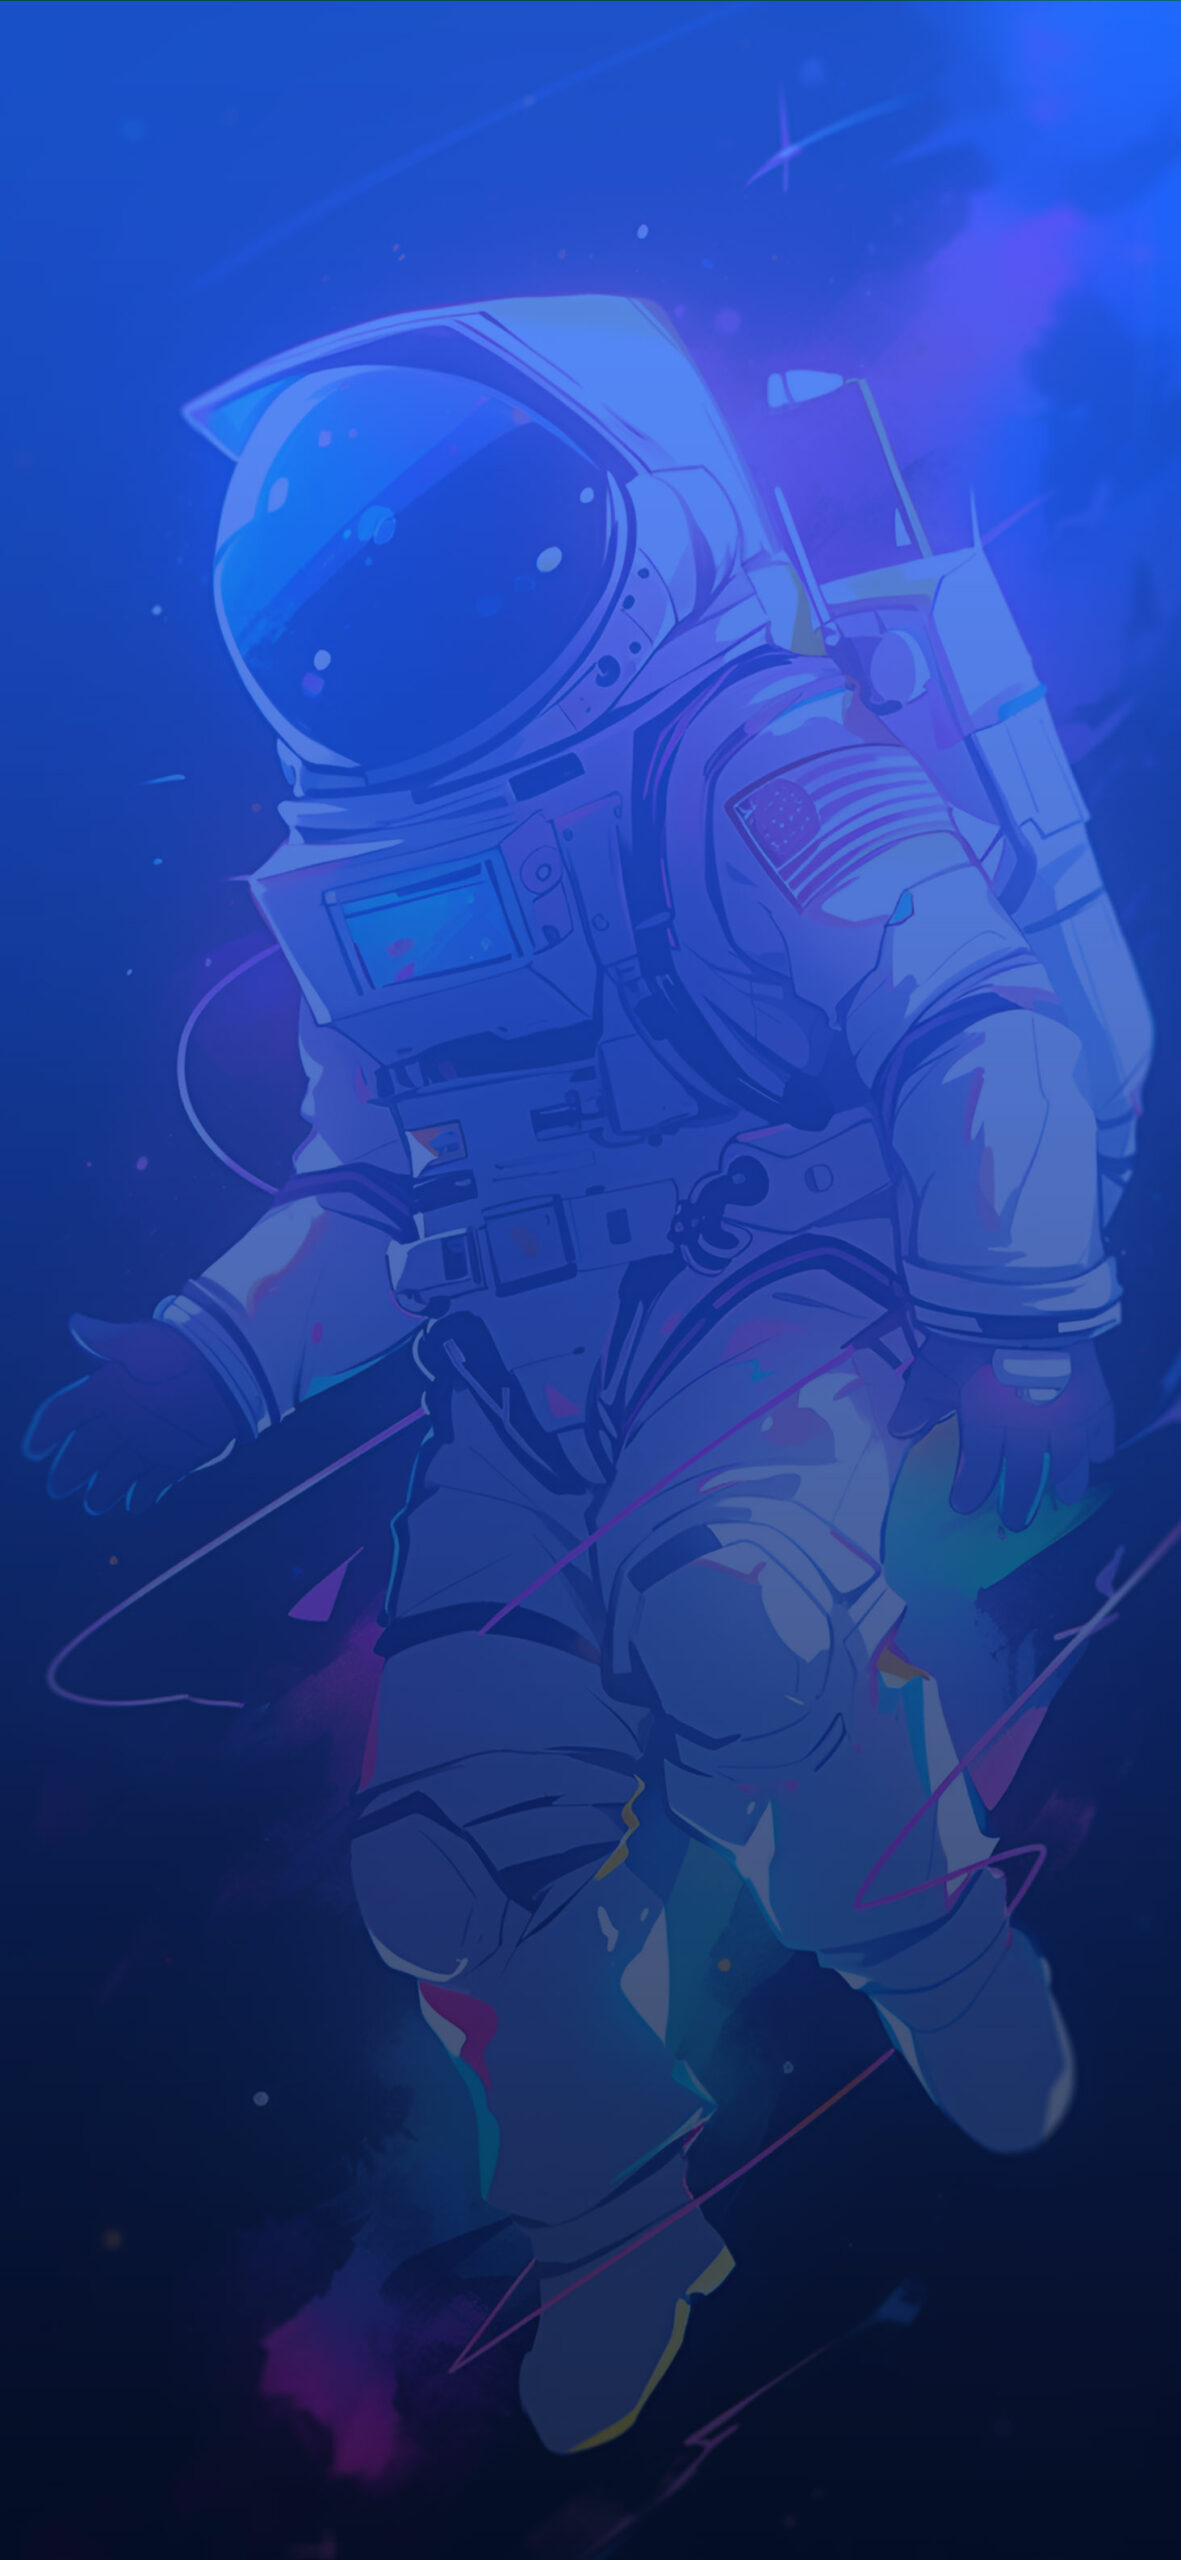 Astronaut in the space trippy wallpaper Space aesthetic wallpa